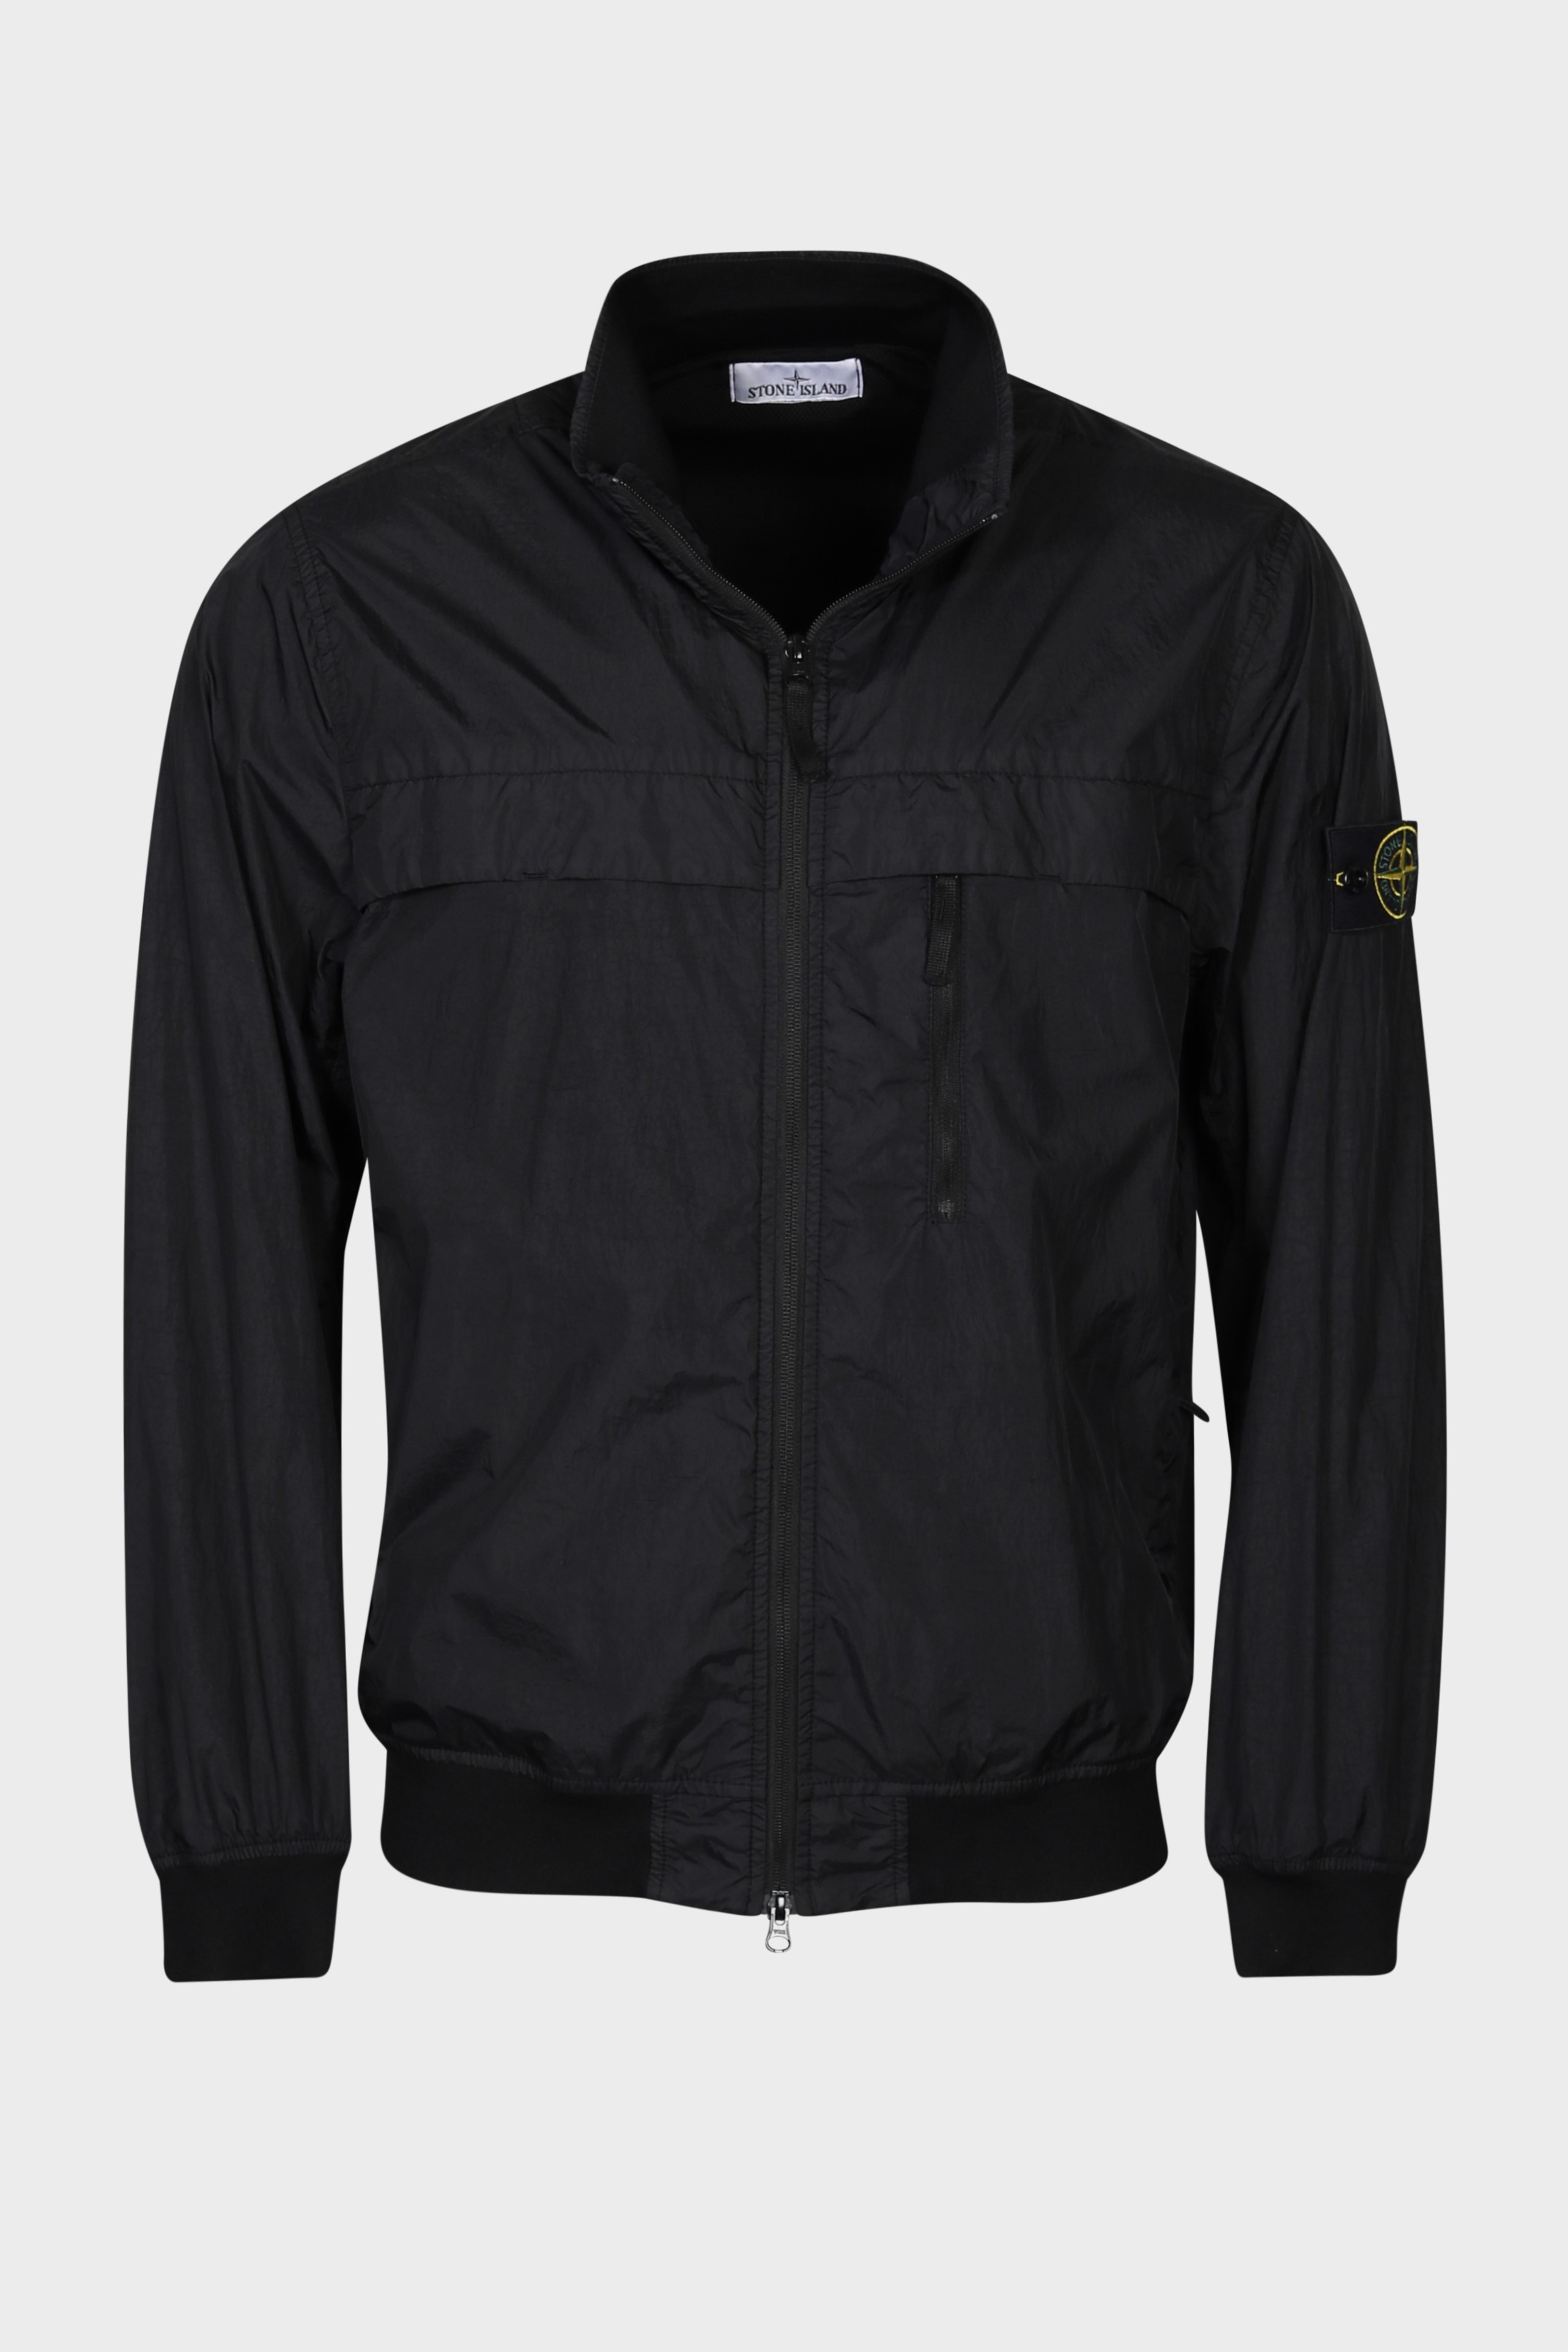 STONE ISLAND Garment Dyed Crinkle Reps Jacket in Black S